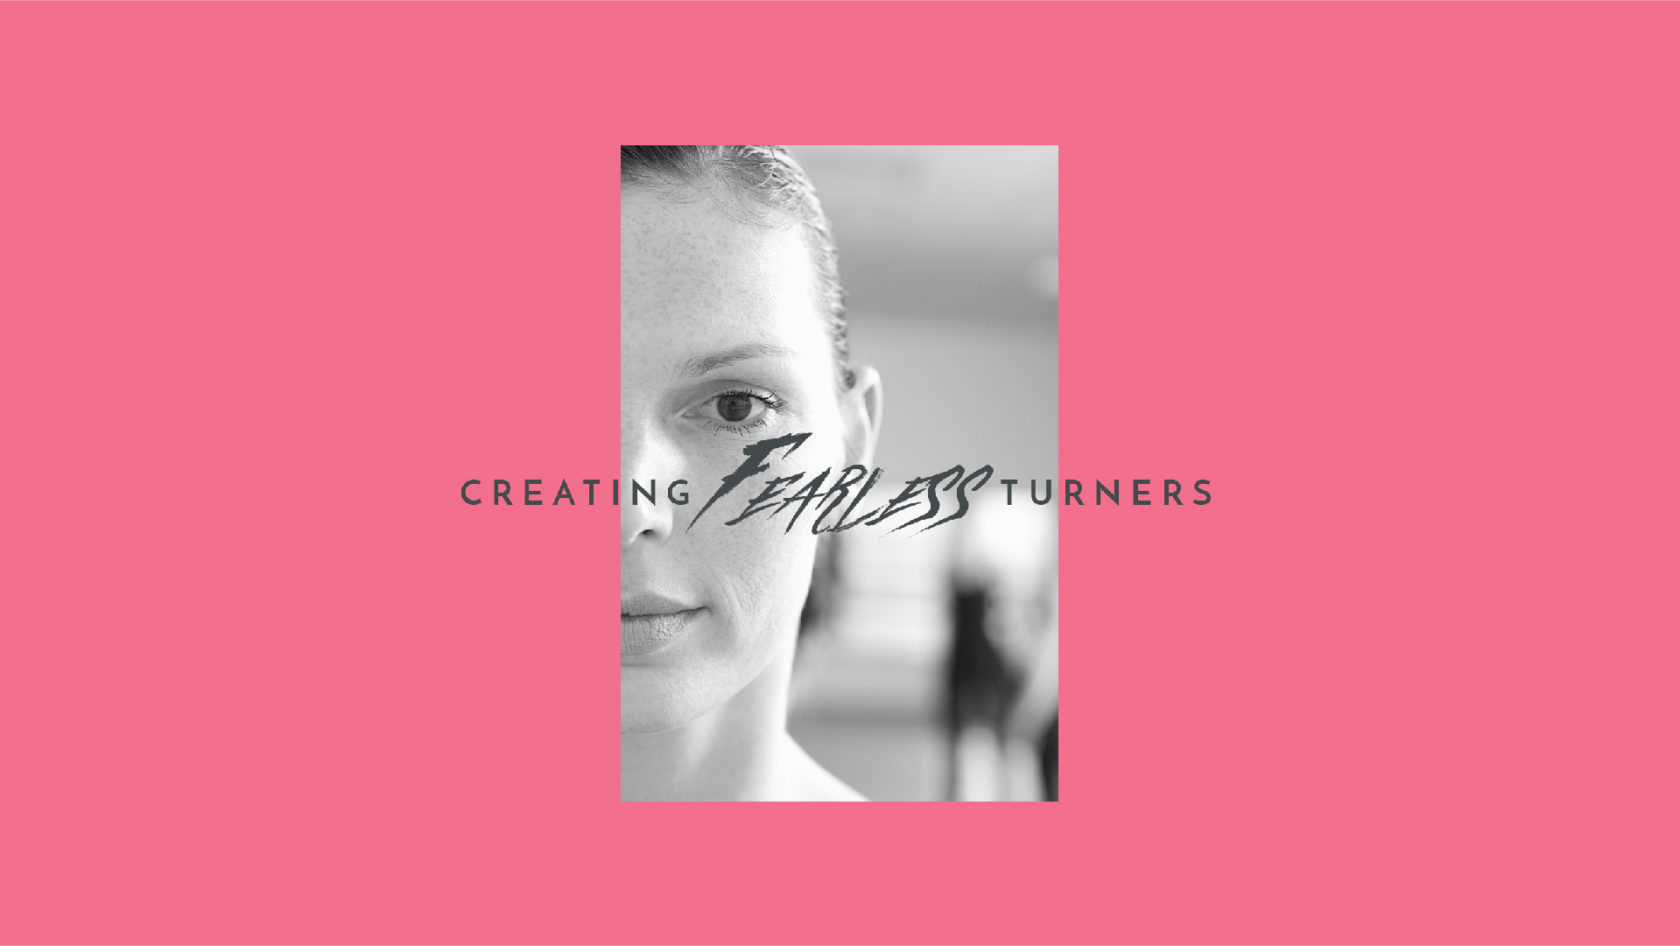 Creating Fearless Turners